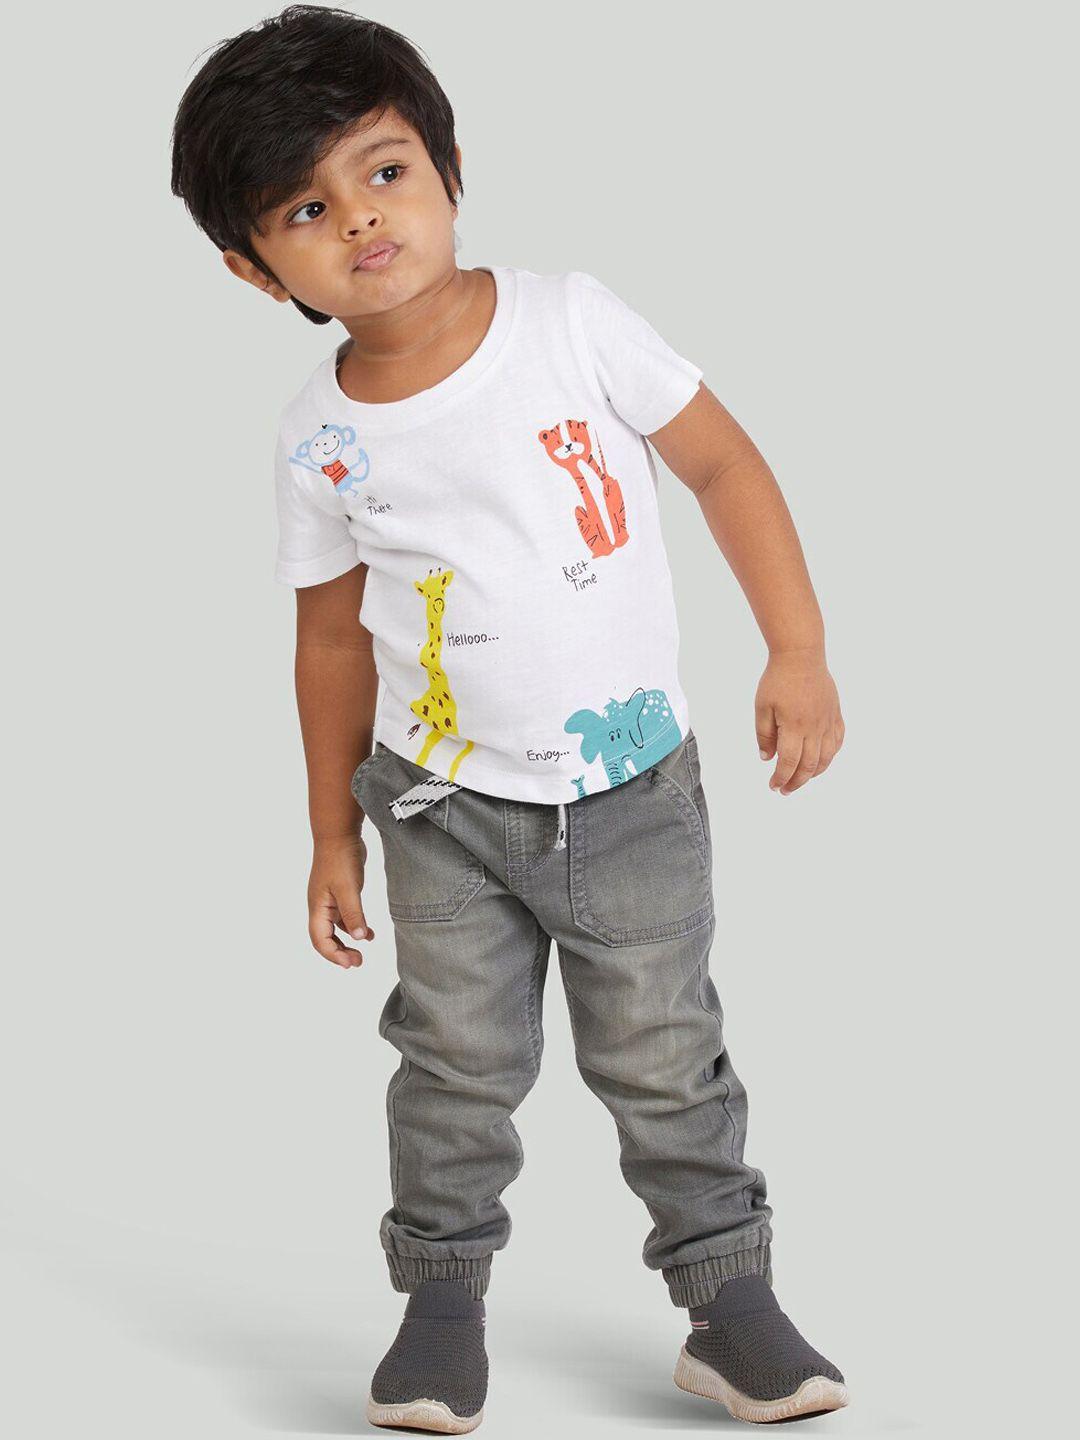 zalio boys white & grey printed pure cotton t-shirt with jeans